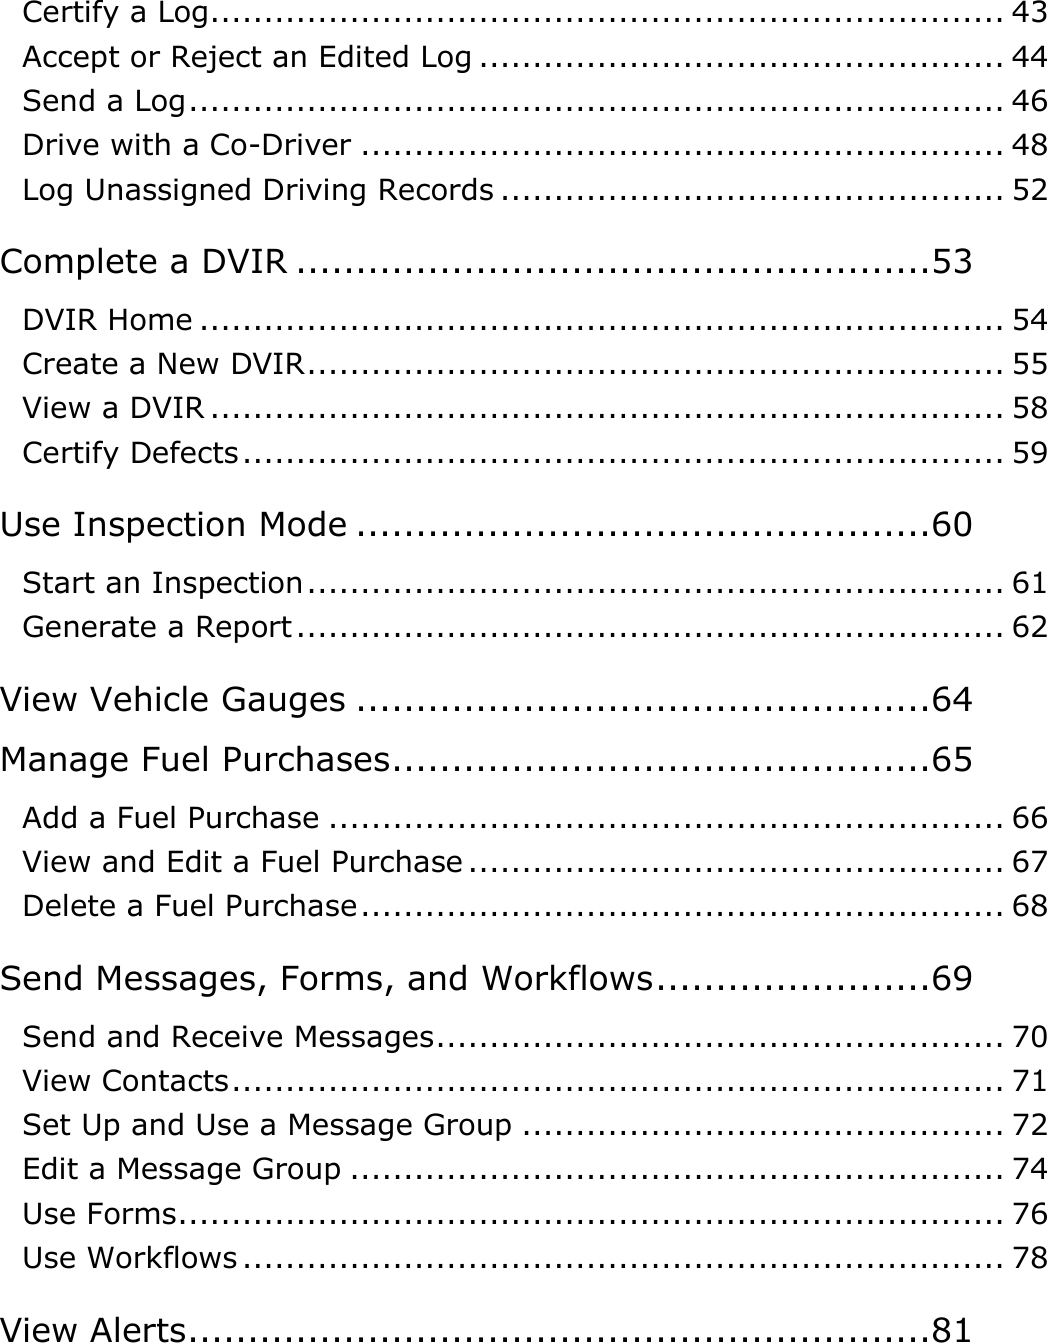 Table of Contents: How Do I…? DriverConnect User Guide  3 © 2017, Rand McNally, Inc. Certify a Log .......................................................................... 43 Accept or Reject an Edited Log ................................................. 44 Send a Log ............................................................................ 46 Drive with a Co-Driver ............................................................ 48 Log Unassigned Driving Records ............................................... 52 Complete a DVIR .....................................................53 DVIR Home ........................................................................... 54 Create a New DVIR ................................................................. 55 View a DVIR .......................................................................... 58 Certify Defects ....................................................................... 59 Use Inspection Mode ................................................60 Start an Inspection ................................................................. 61 Generate a Report .................................................................. 62 View Vehicle Gauges ................................................64 Manage Fuel Purchases .............................................65 Add a Fuel Purchase ............................................................... 66 View and Edit a Fuel Purchase .................................................. 67 Delete a Fuel Purchase ............................................................ 68 Send Messages, Forms, and Workflows .......................69 Send and Receive Messages ..................................................... 70 View Contacts ........................................................................ 71 Set Up and Use a Message Group ............................................. 72 Edit a Message Group ............................................................. 74 Use Forms ............................................................................. 76 Use Workflows ....................................................................... 78 View Alerts ..............................................................81 